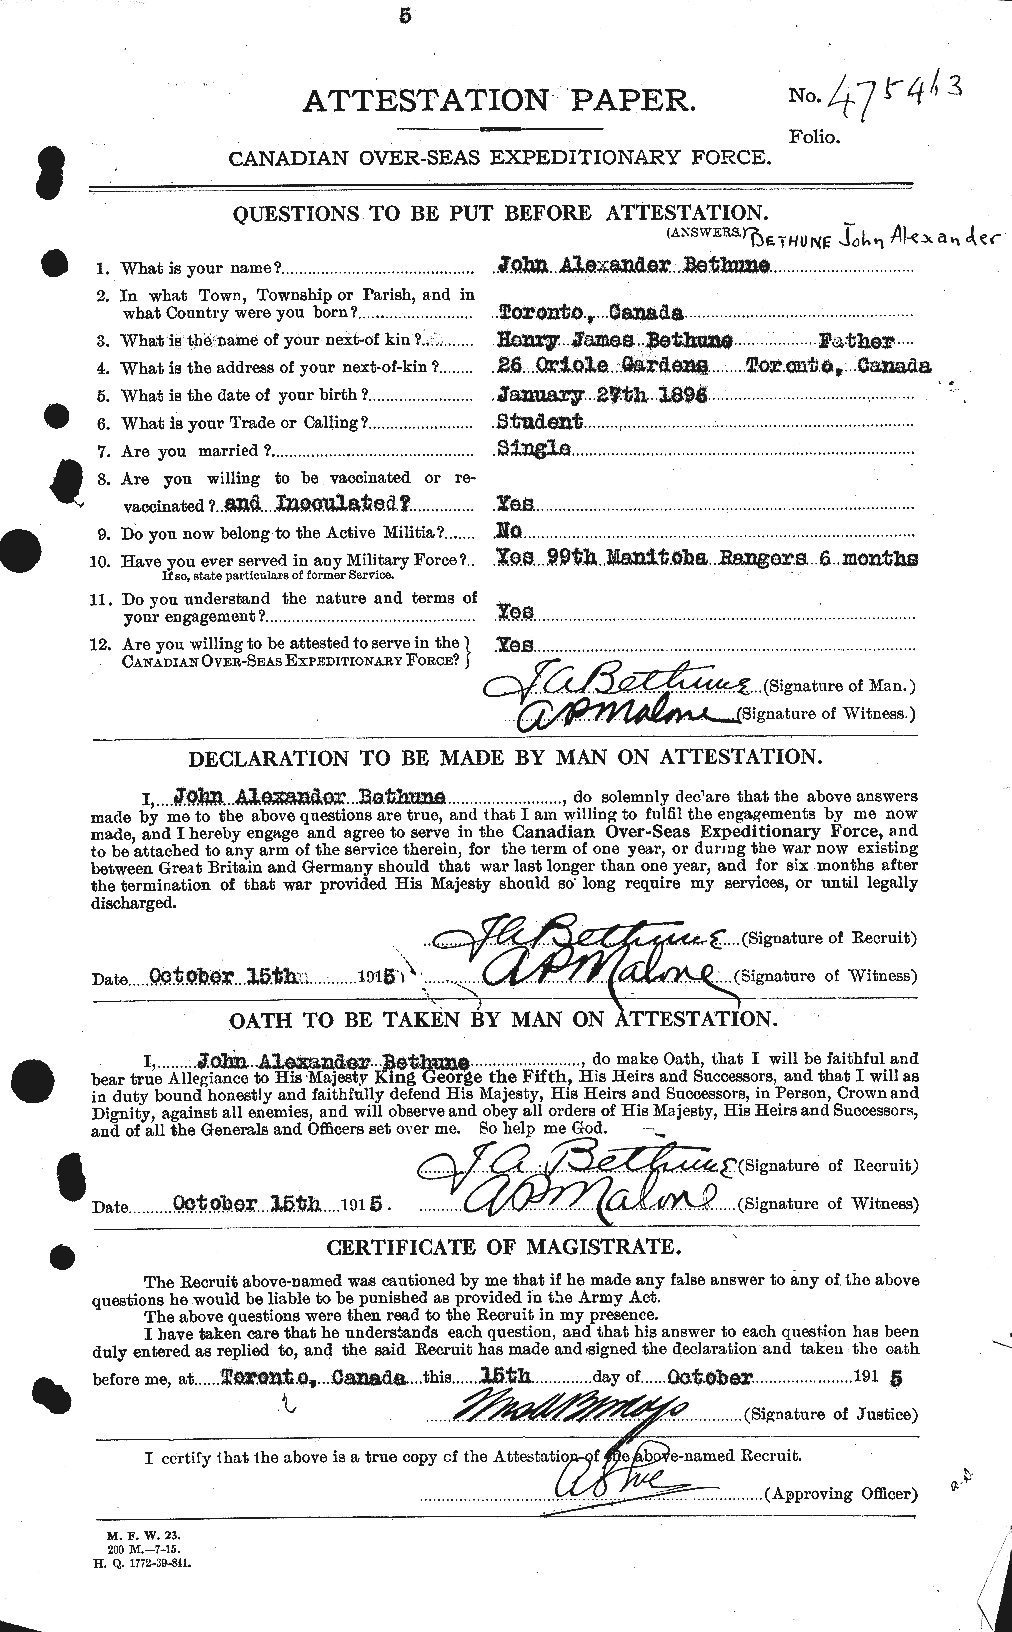 Personnel Records of the First World War - CEF 237024a